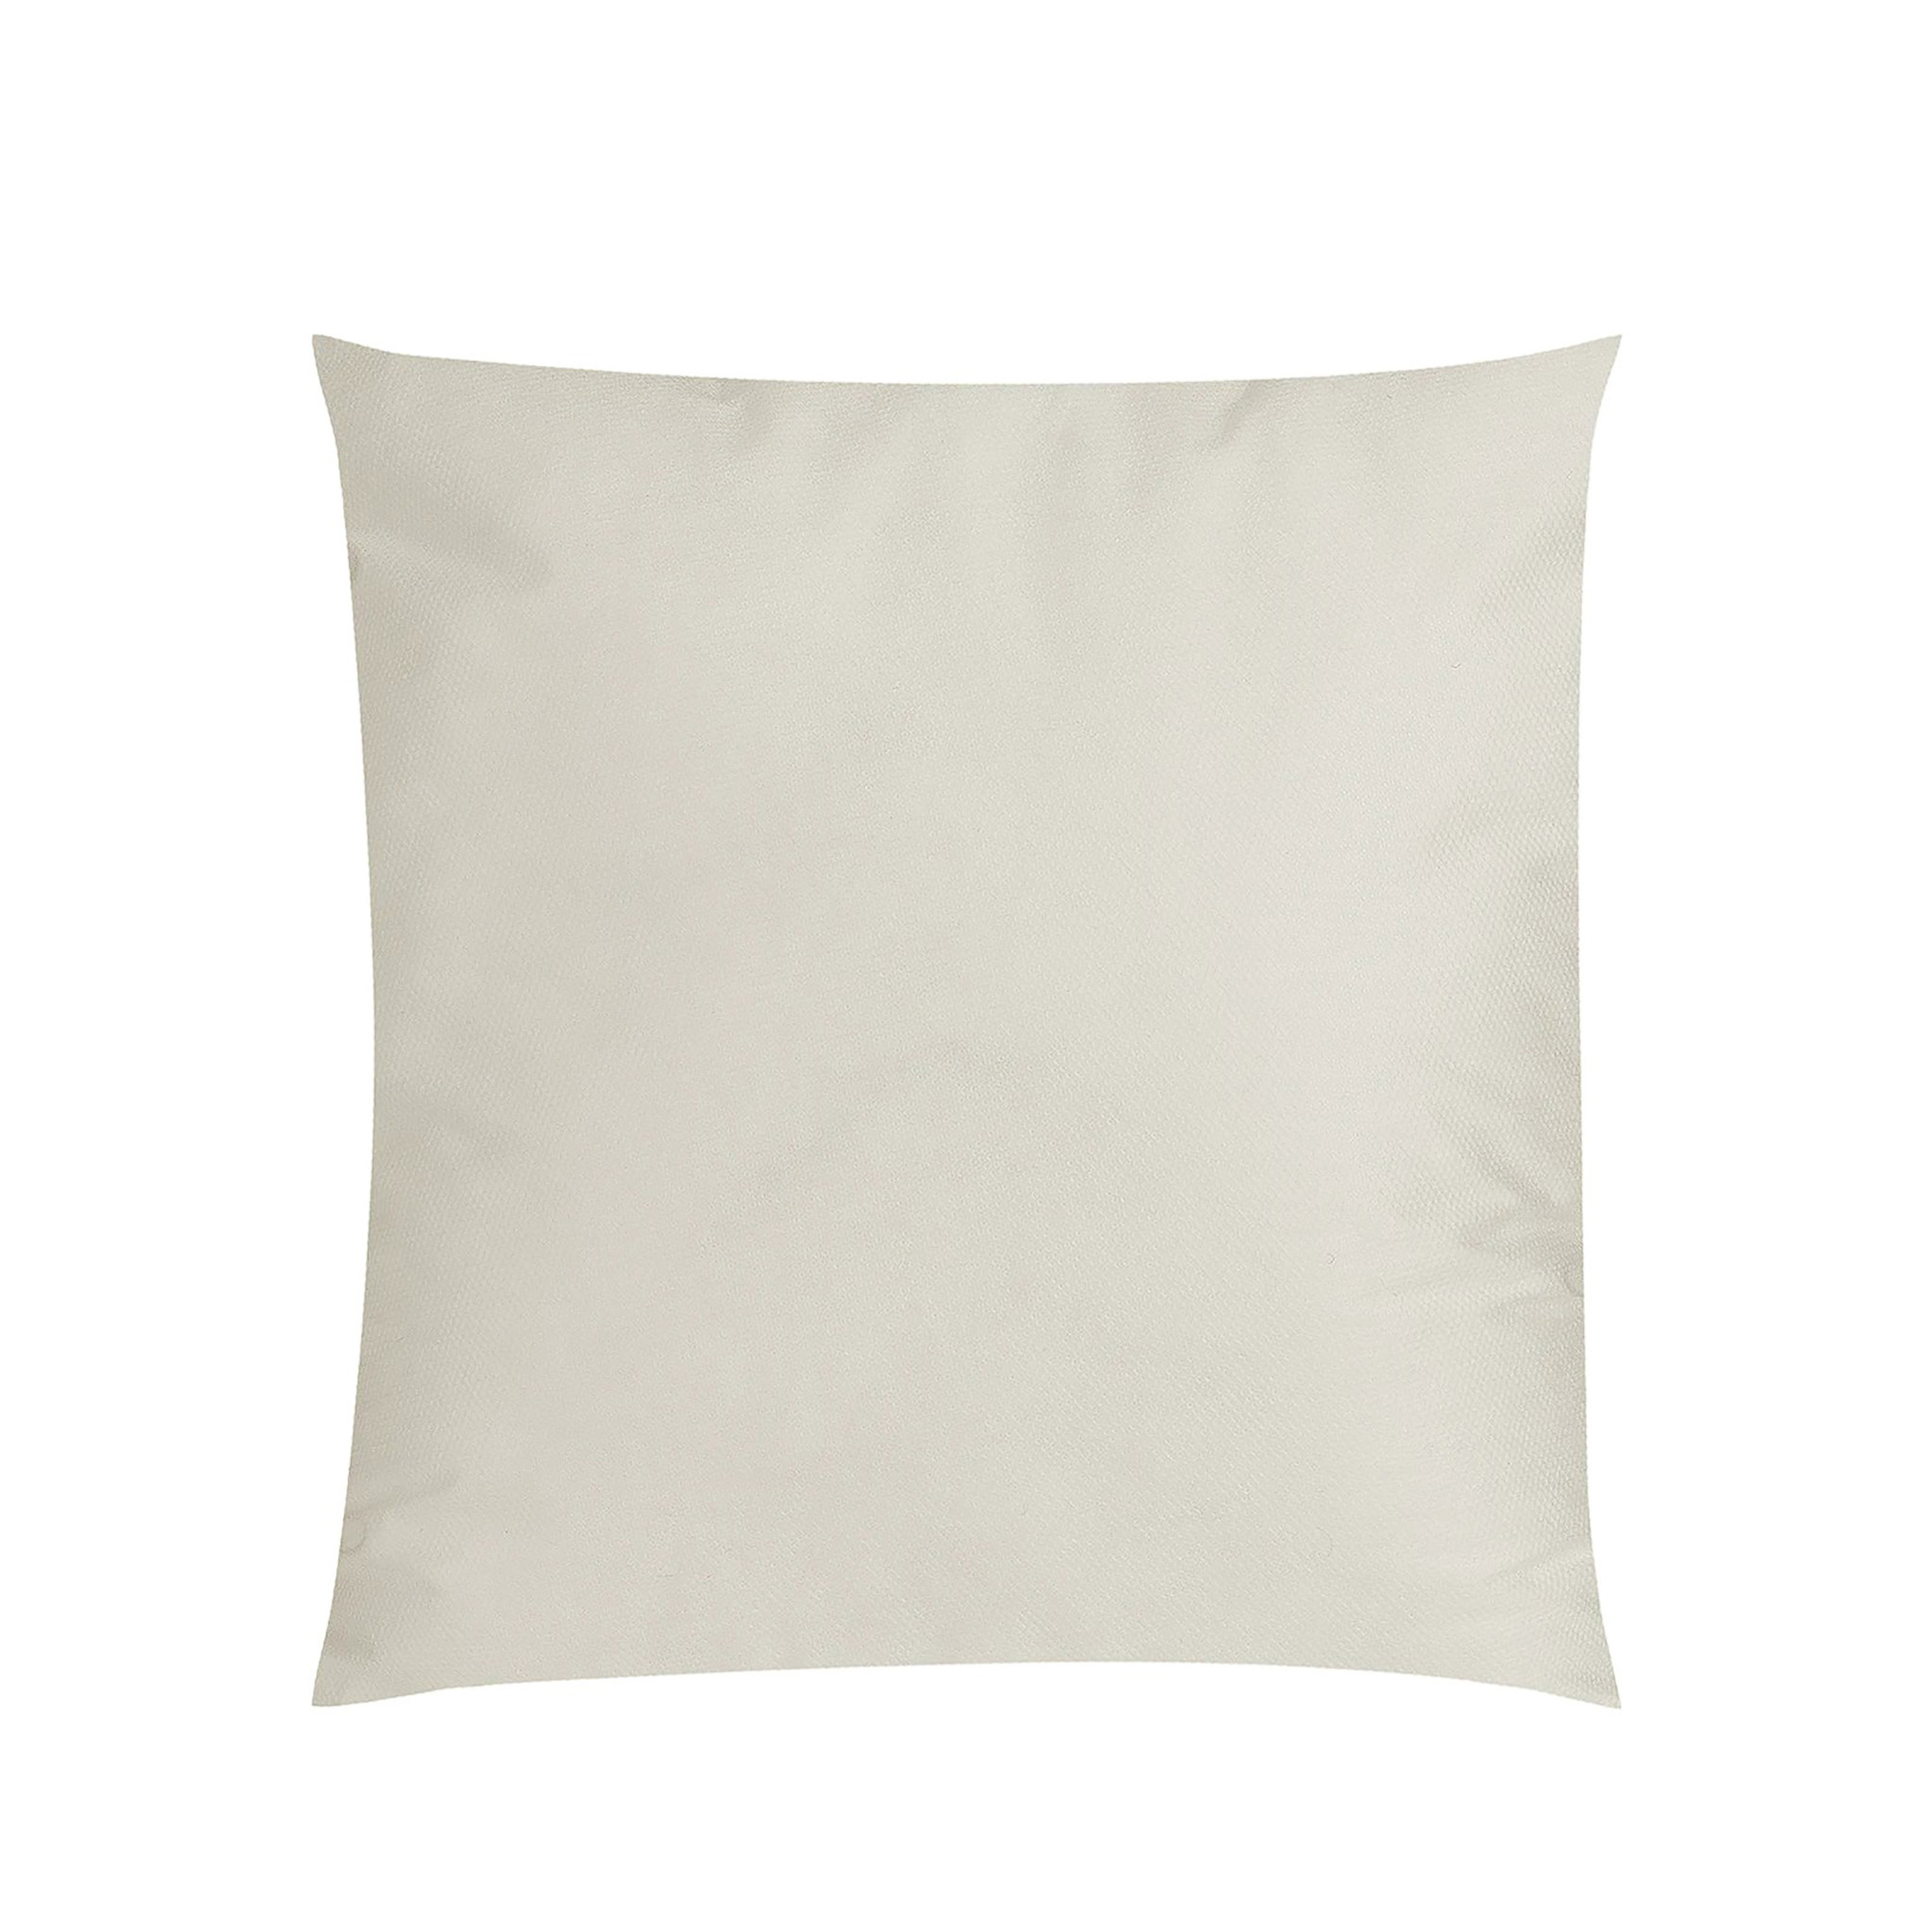 BLOMUS // FILL - CUSHION FILLING | 40 X 40 CM MADE OF 100% RECYCLED FEATHERS | WHITE